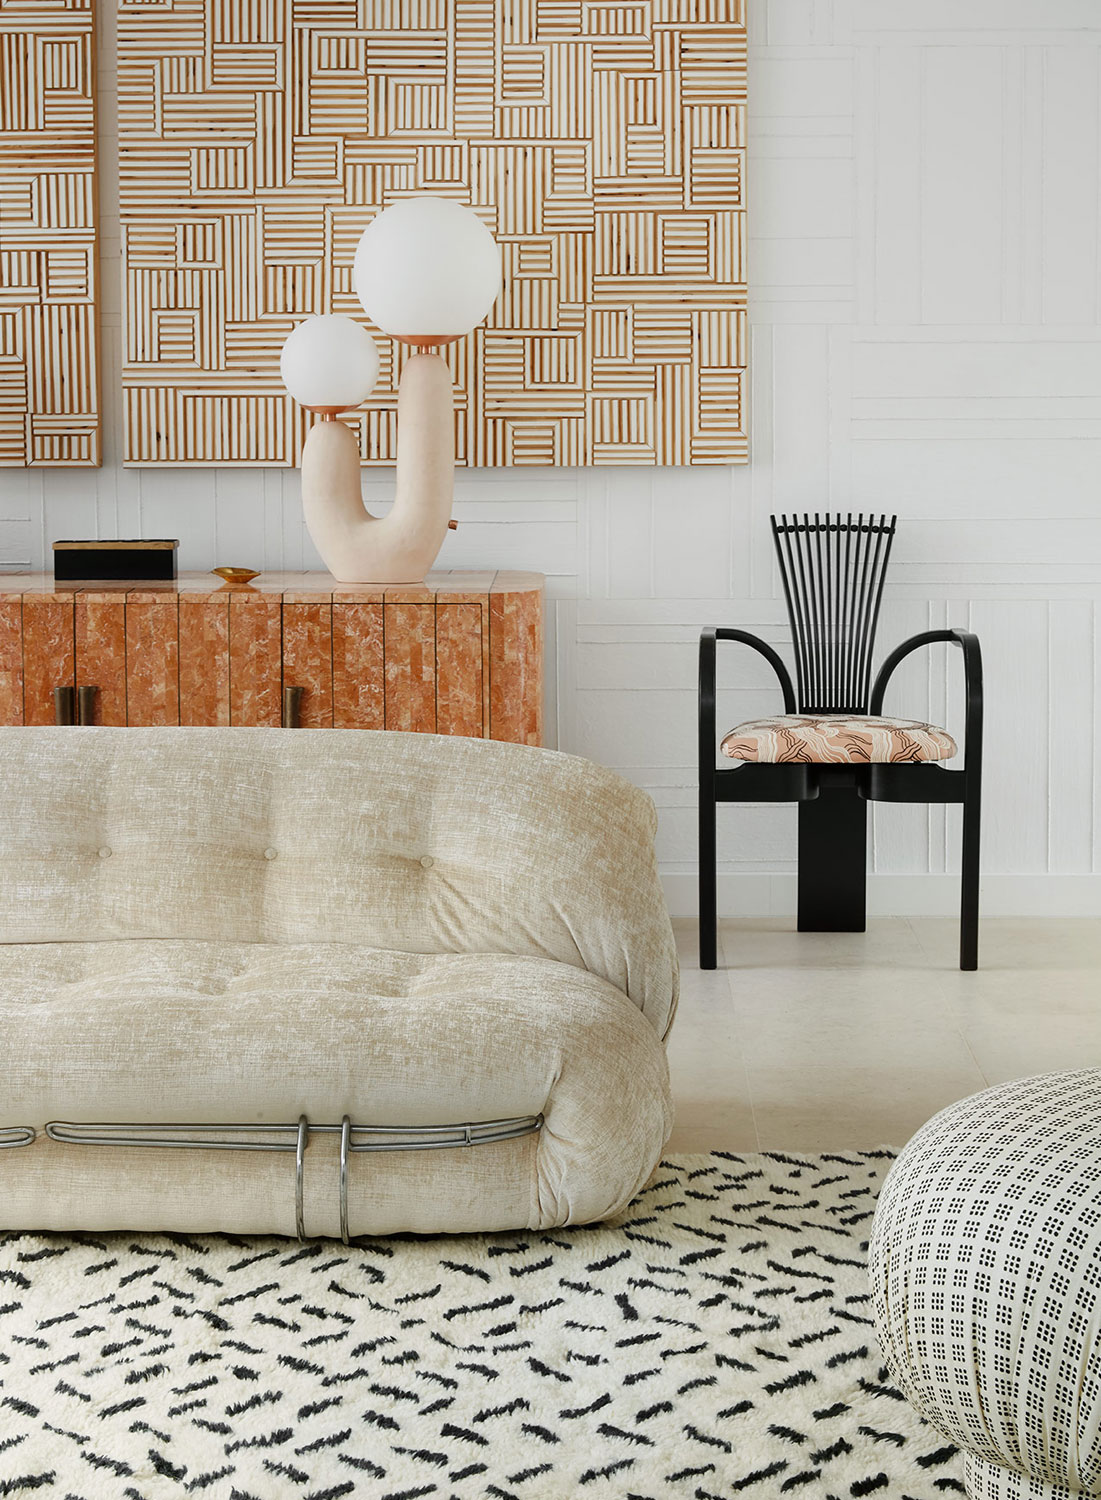 Modern meets 80s home decor. Living Room. Live fearlessly with your home decor.